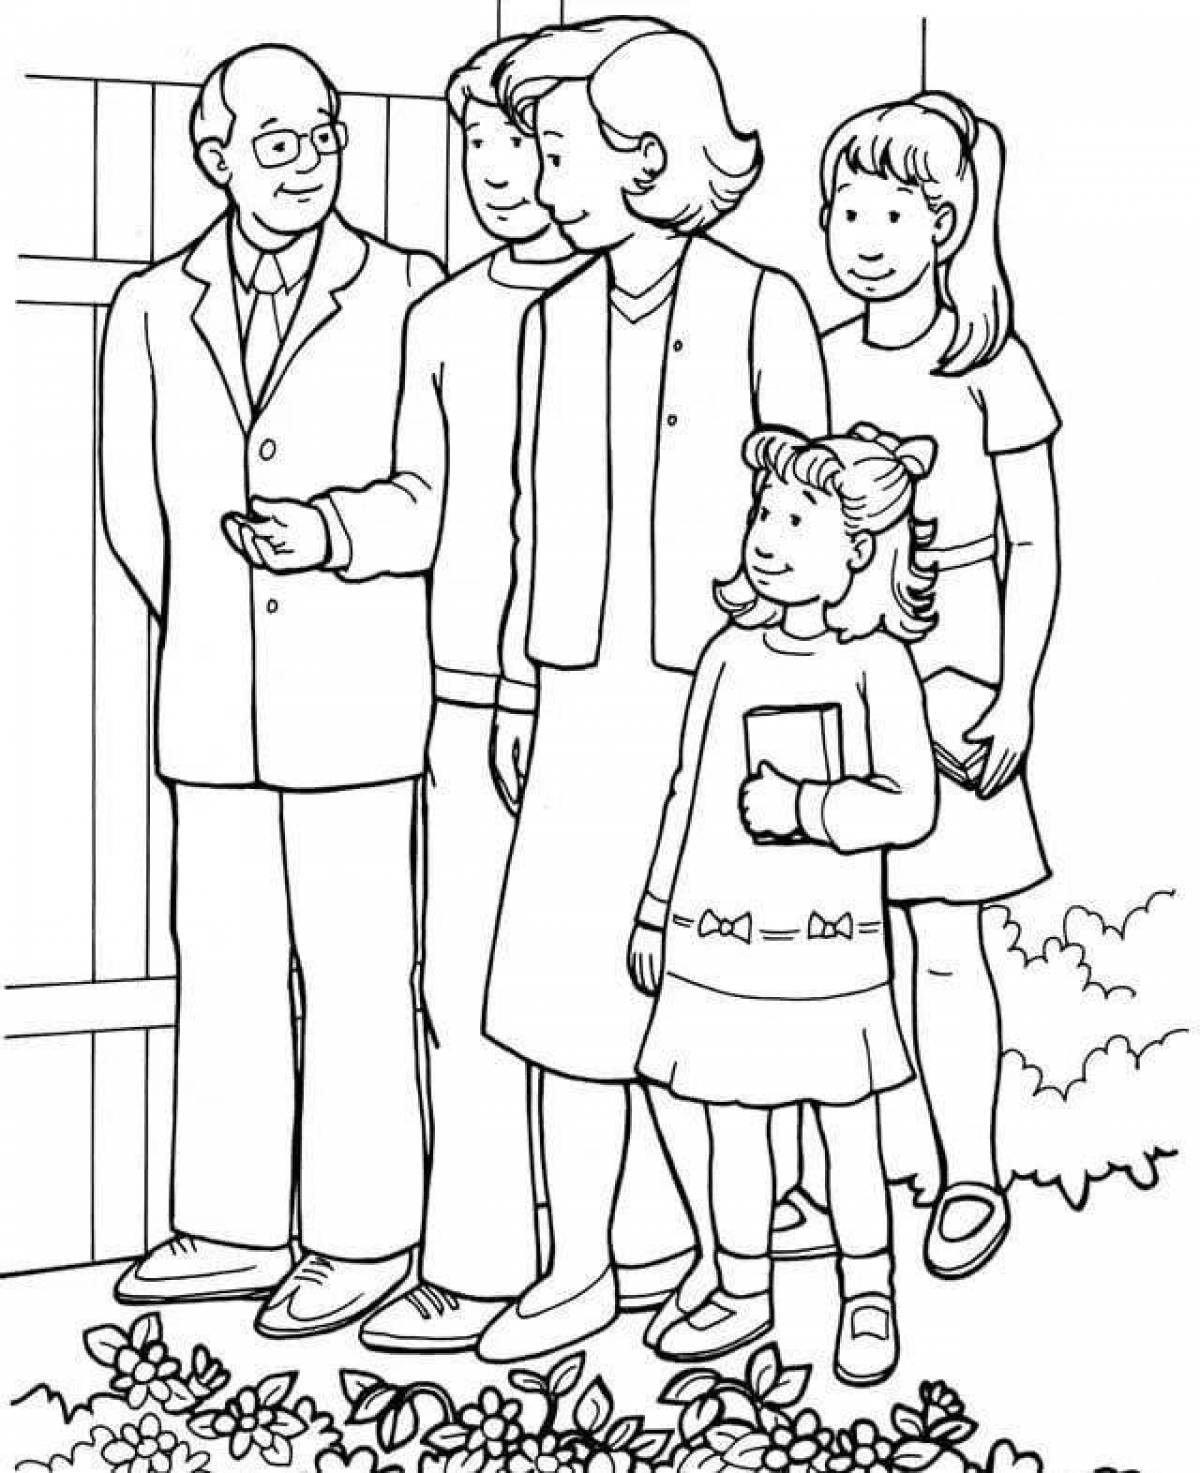 Exquisite family coloring book